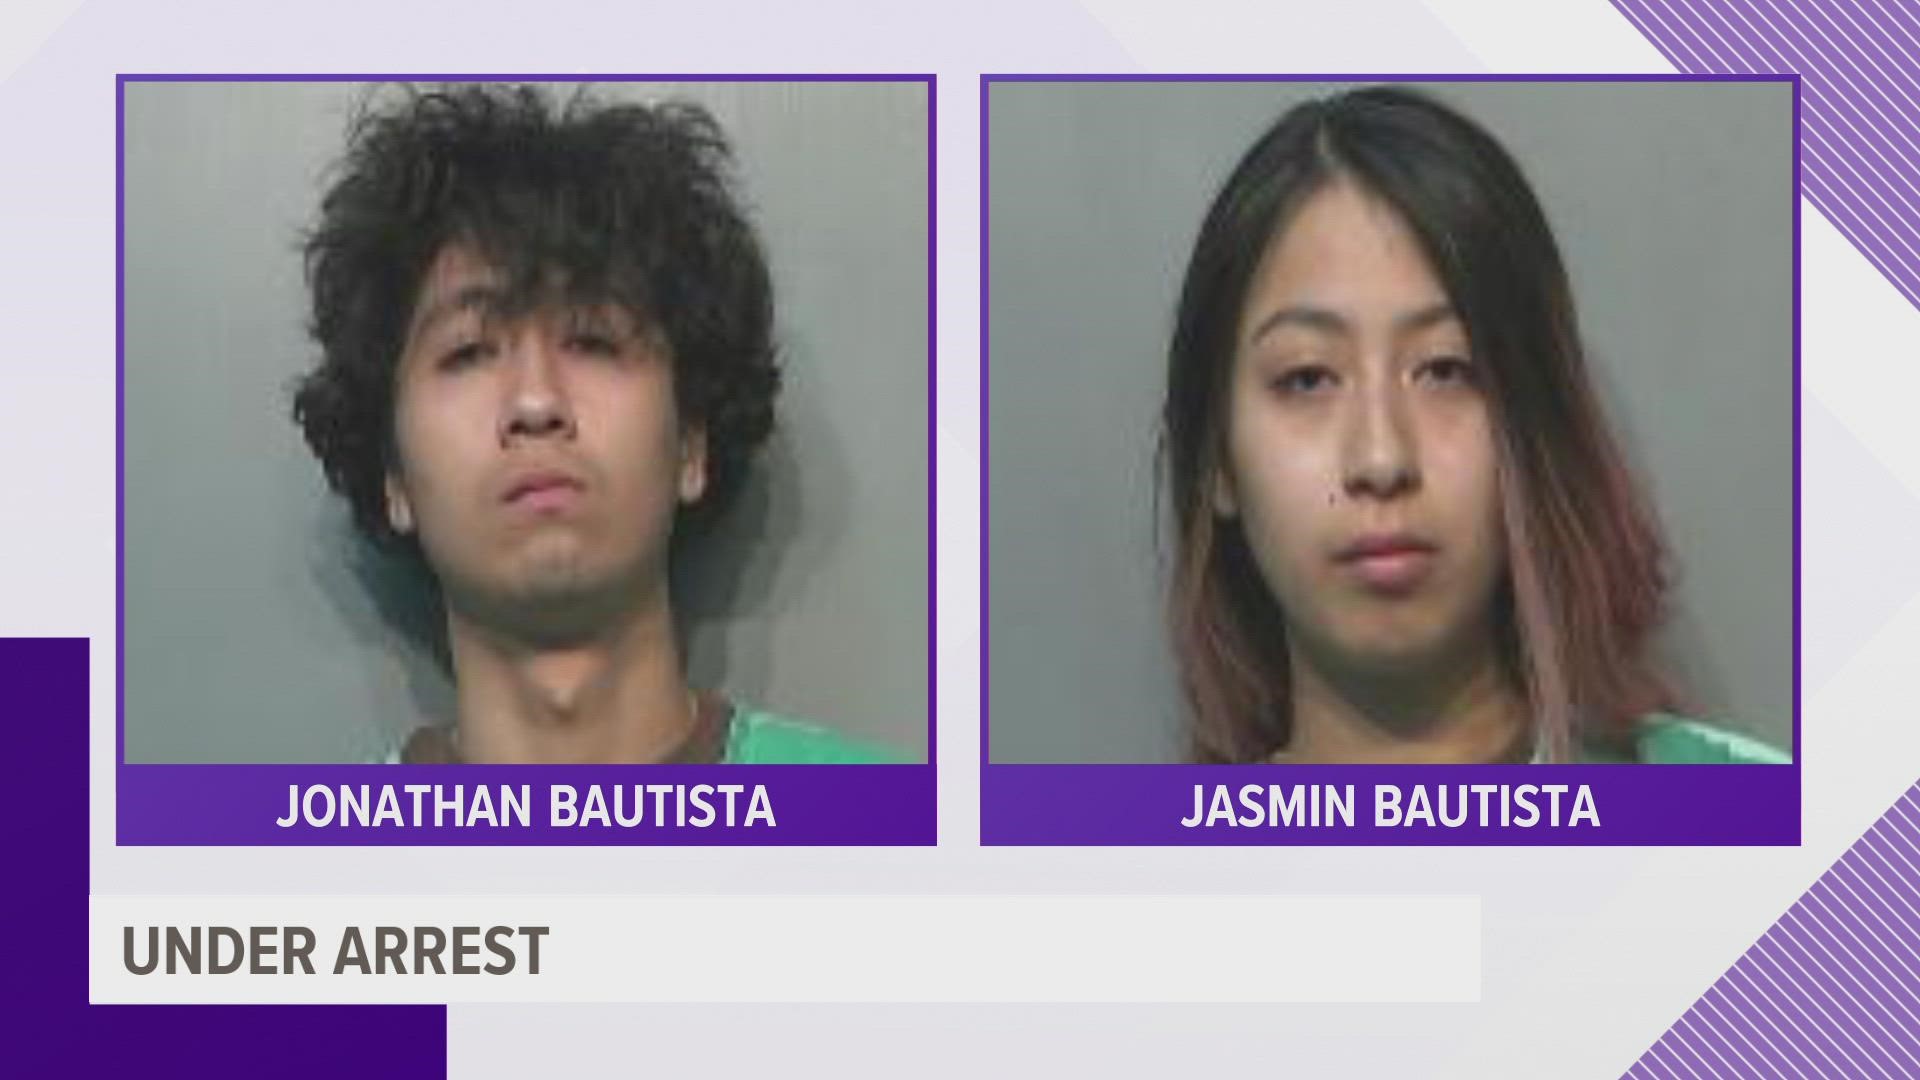 Law enforcement said Jasmin and Jonathan Bautista are accused of first-degree murder.